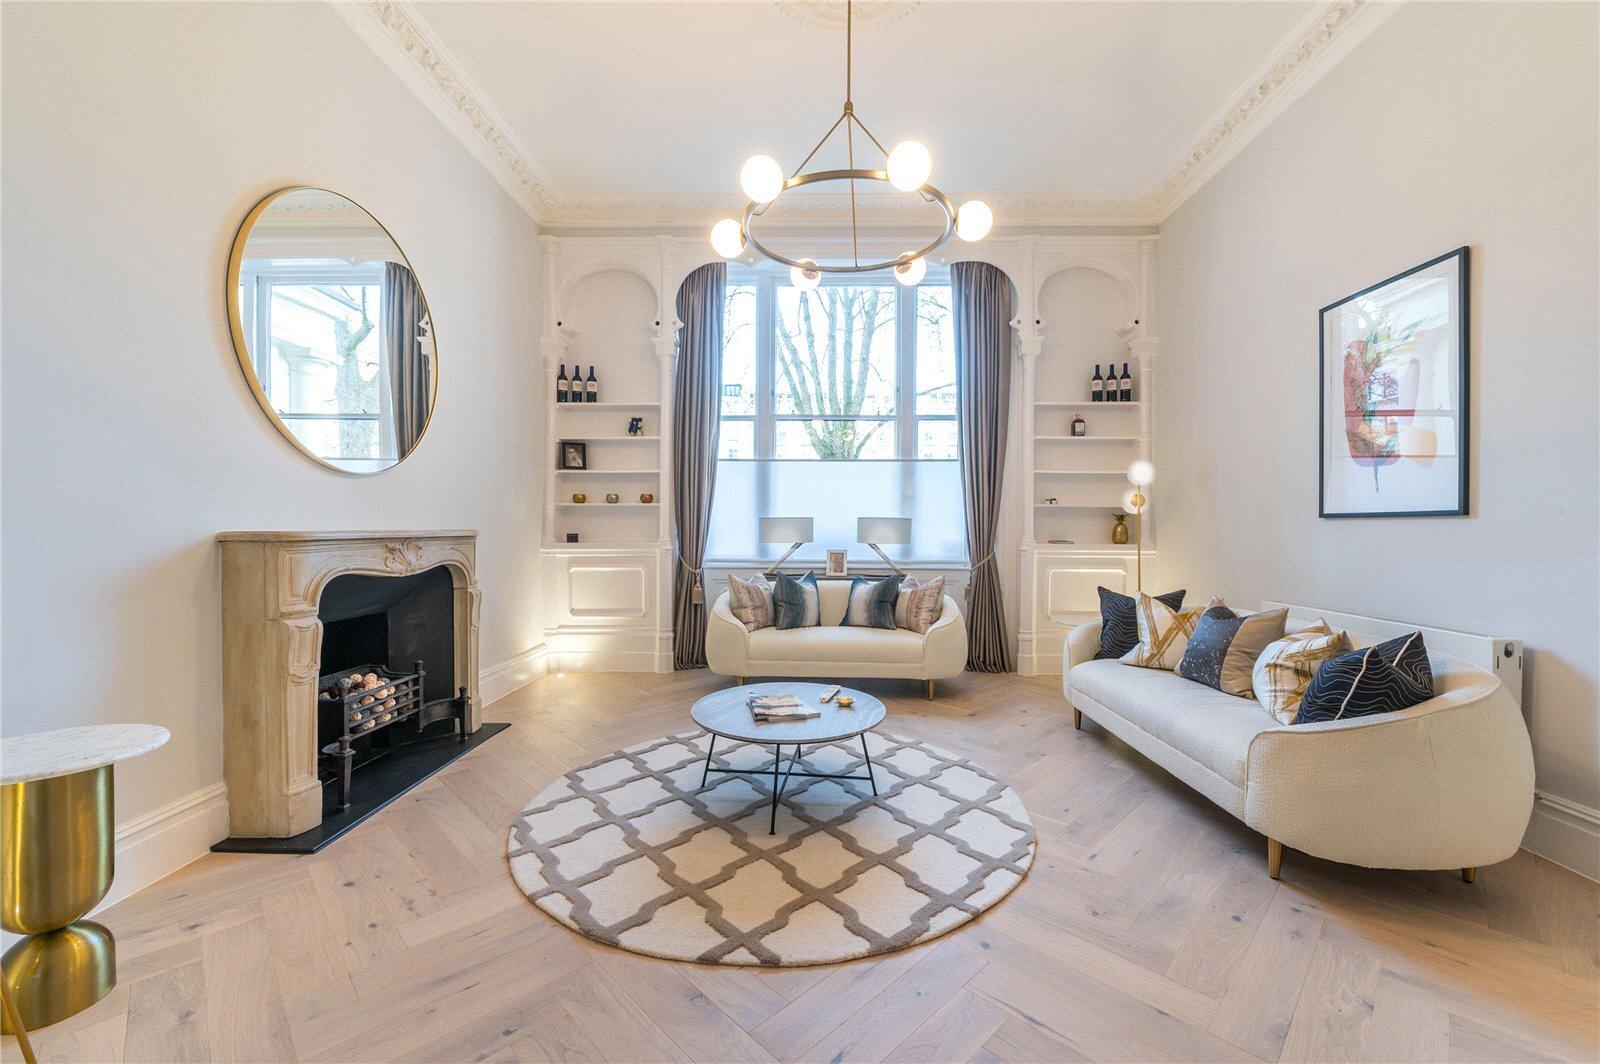 A white living room with a fireplace and a herring bone styled floor.